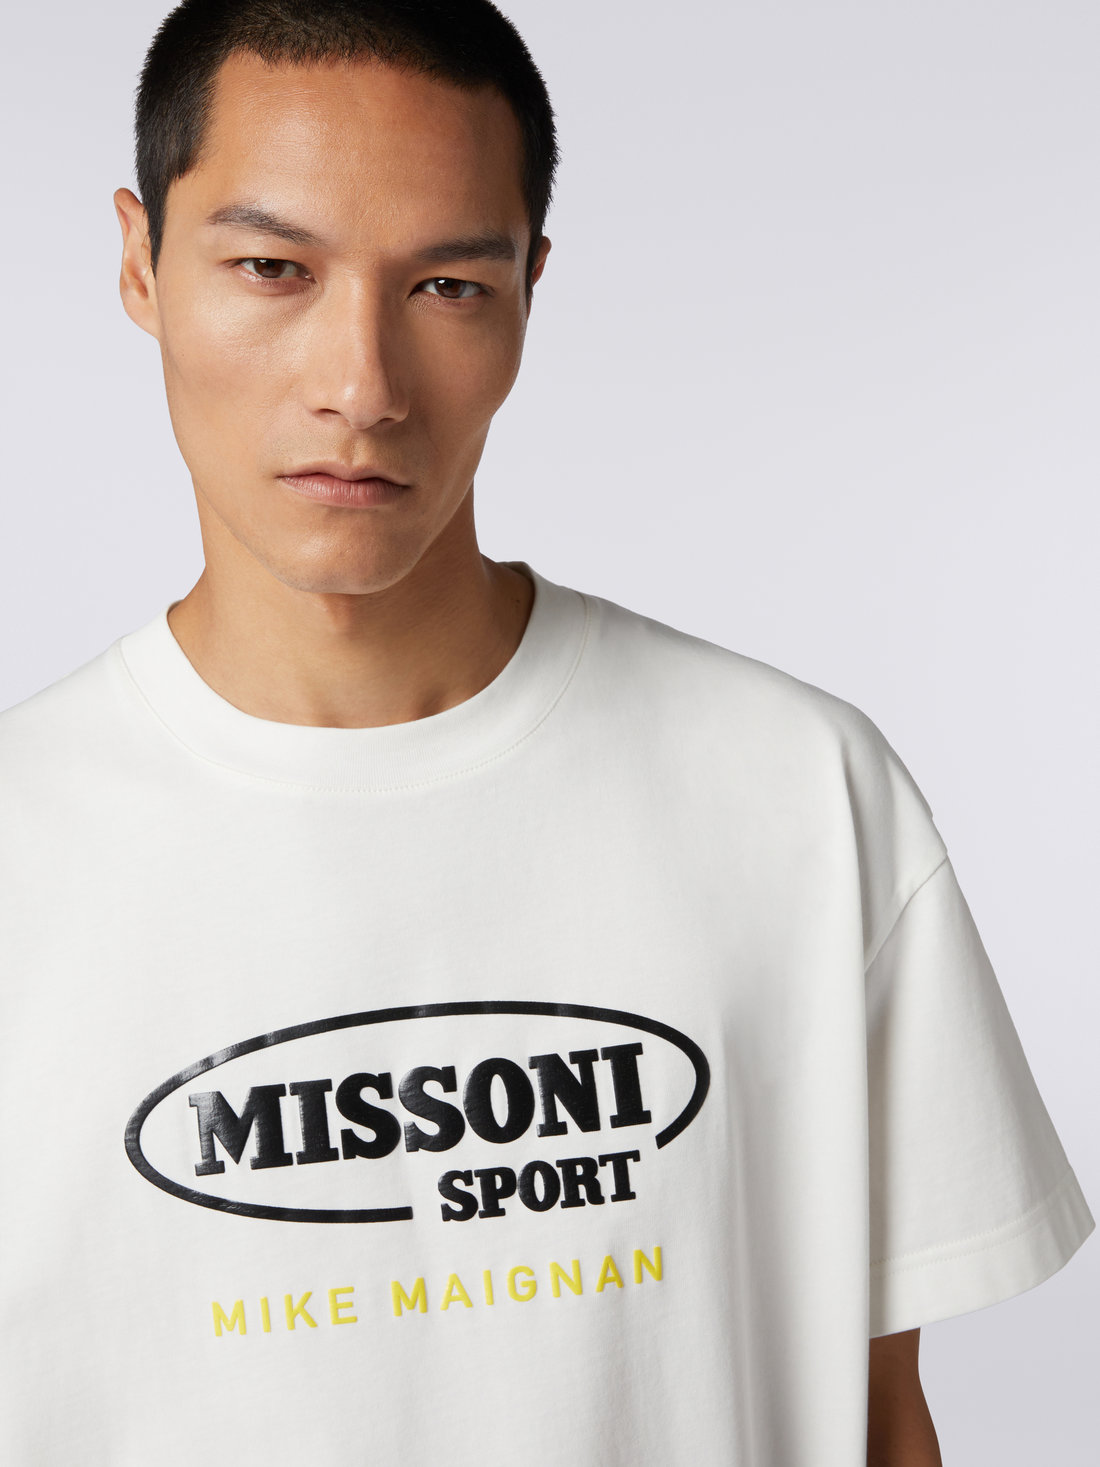 Crew-neck cotton T-shirt with logo in collaboration with Mike Maignan, White - TS23SL01BJ00HWS019Y - 4